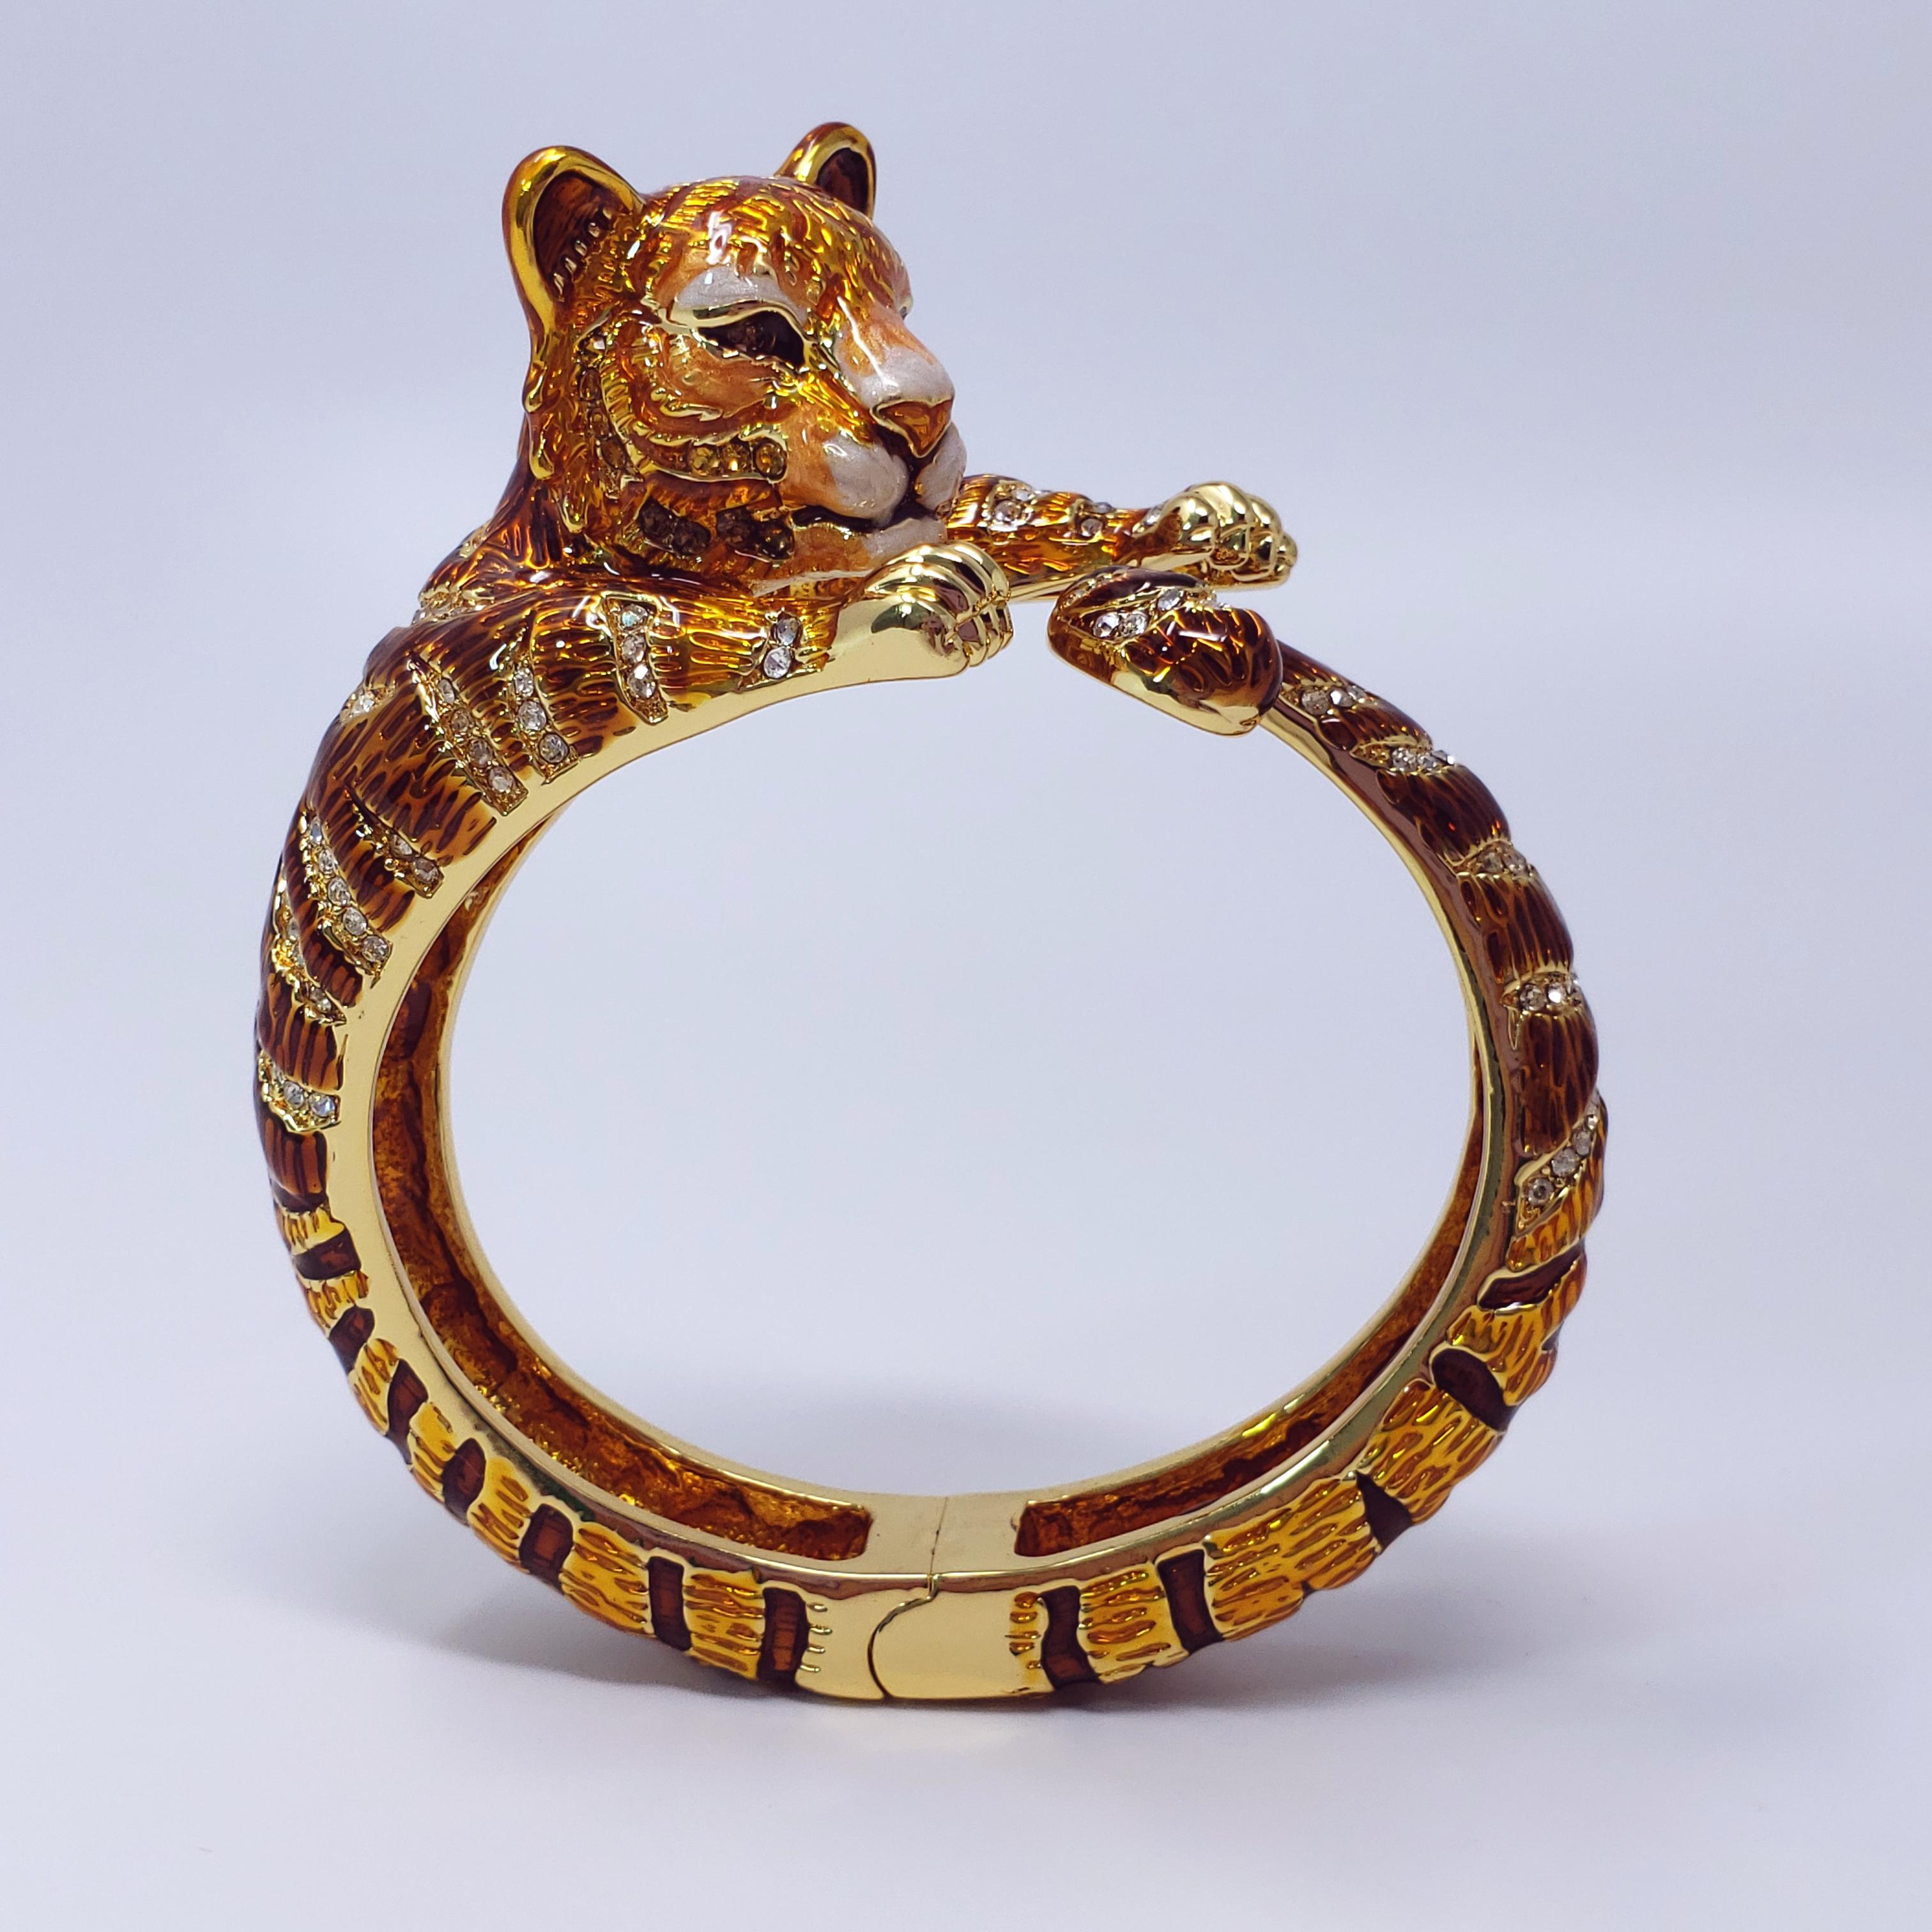 Whimsical Jay Strongwater tiger bracelet. Hand-painted yellow, orange, brown, black, and white enamel. Accented with amber and clear crystals on goldtone metal.

...

Hallmarks: JAY, JAY STRONGWATER, CN

Measurements: 17.2 cm inner circumference,